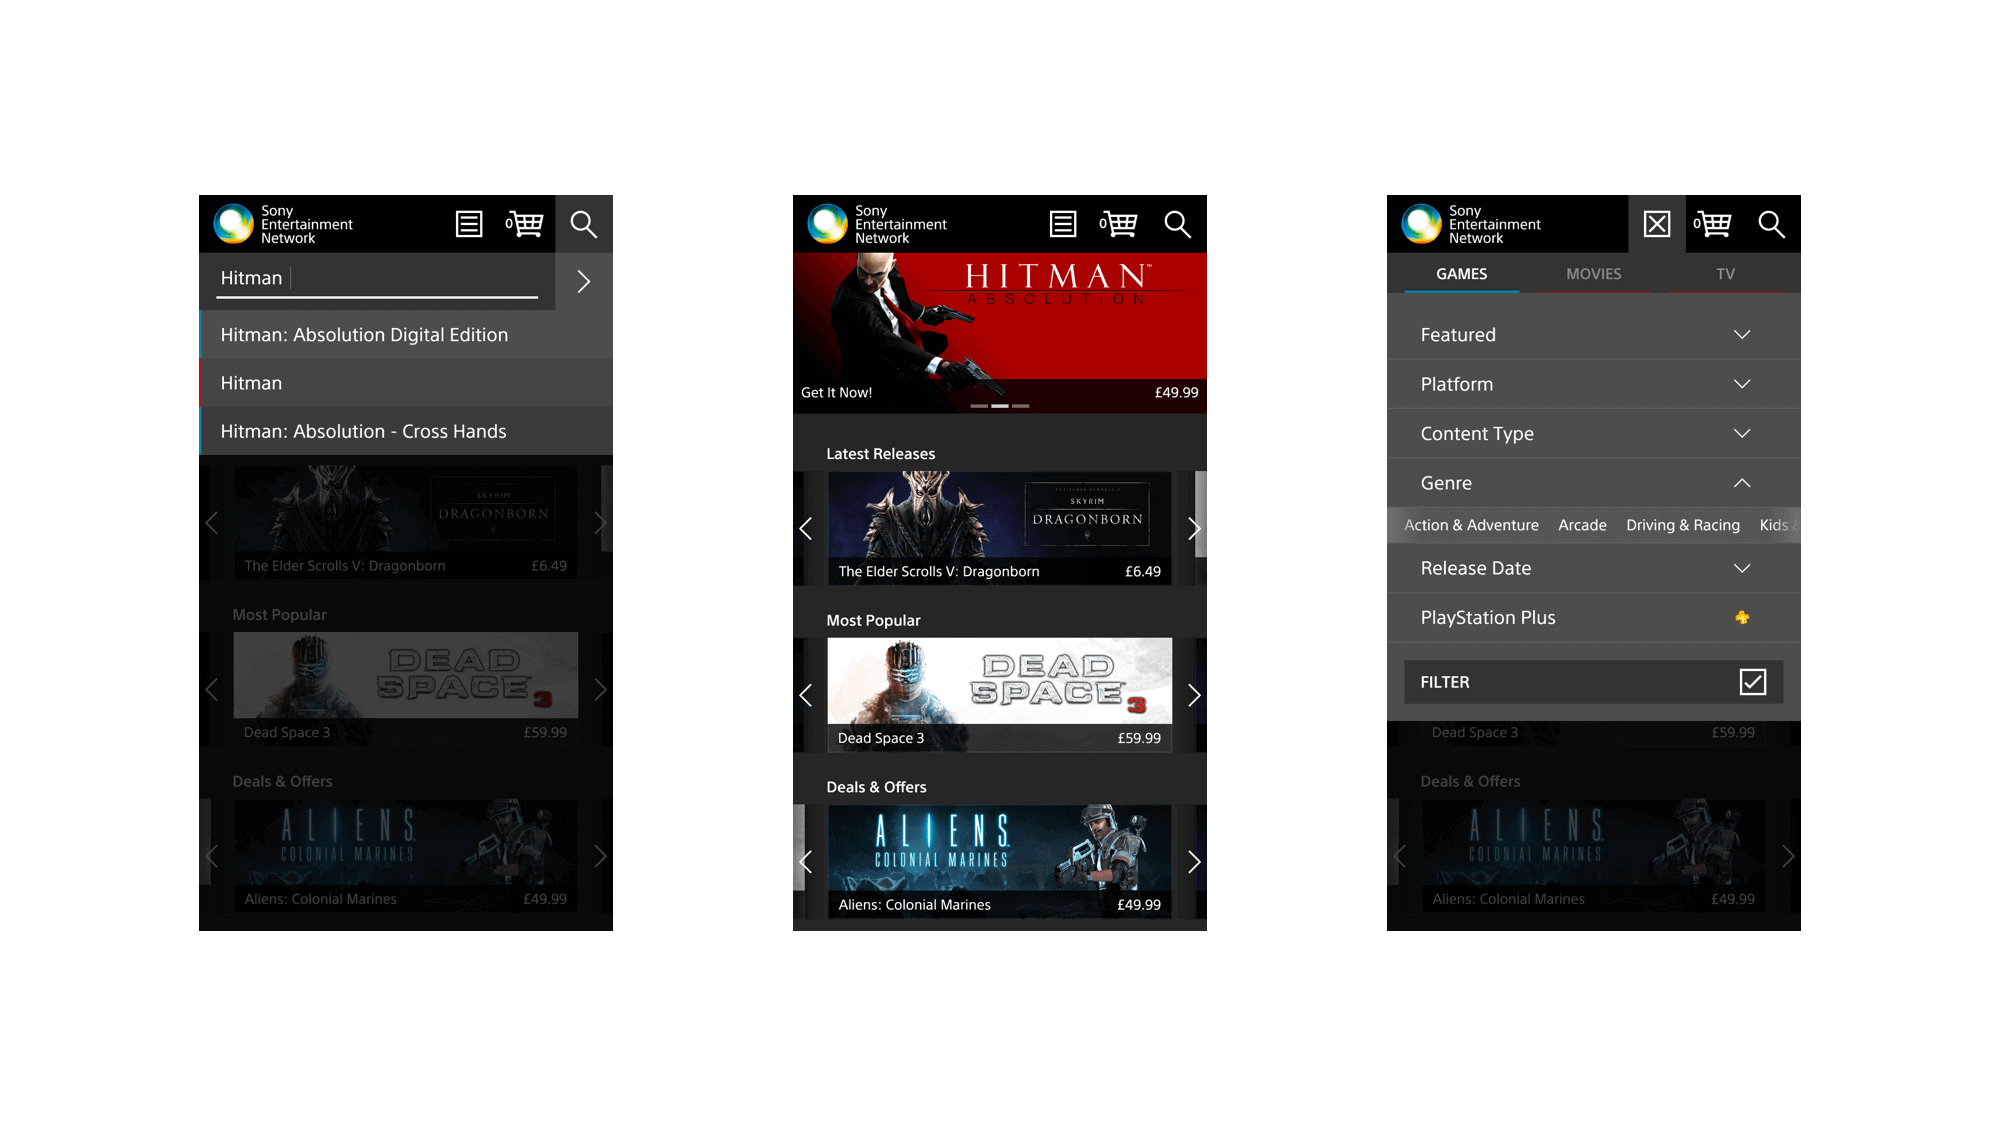 PlayStation Store mobile designs for search suggestion overlay, homepage, and menu overlay